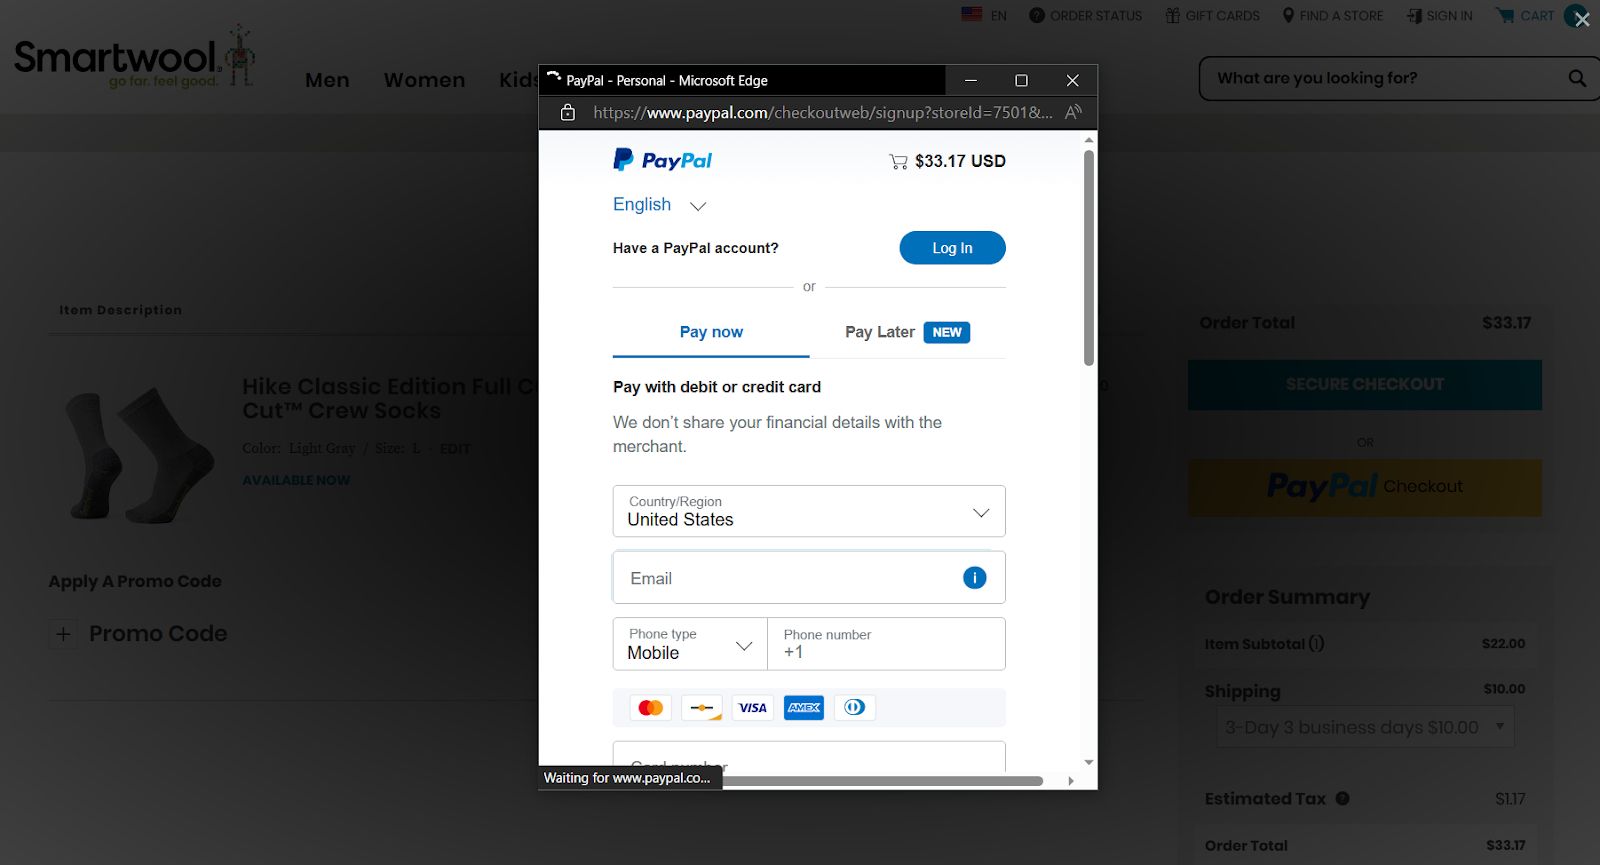 Paypal Checkout button opens a PayPal window.  